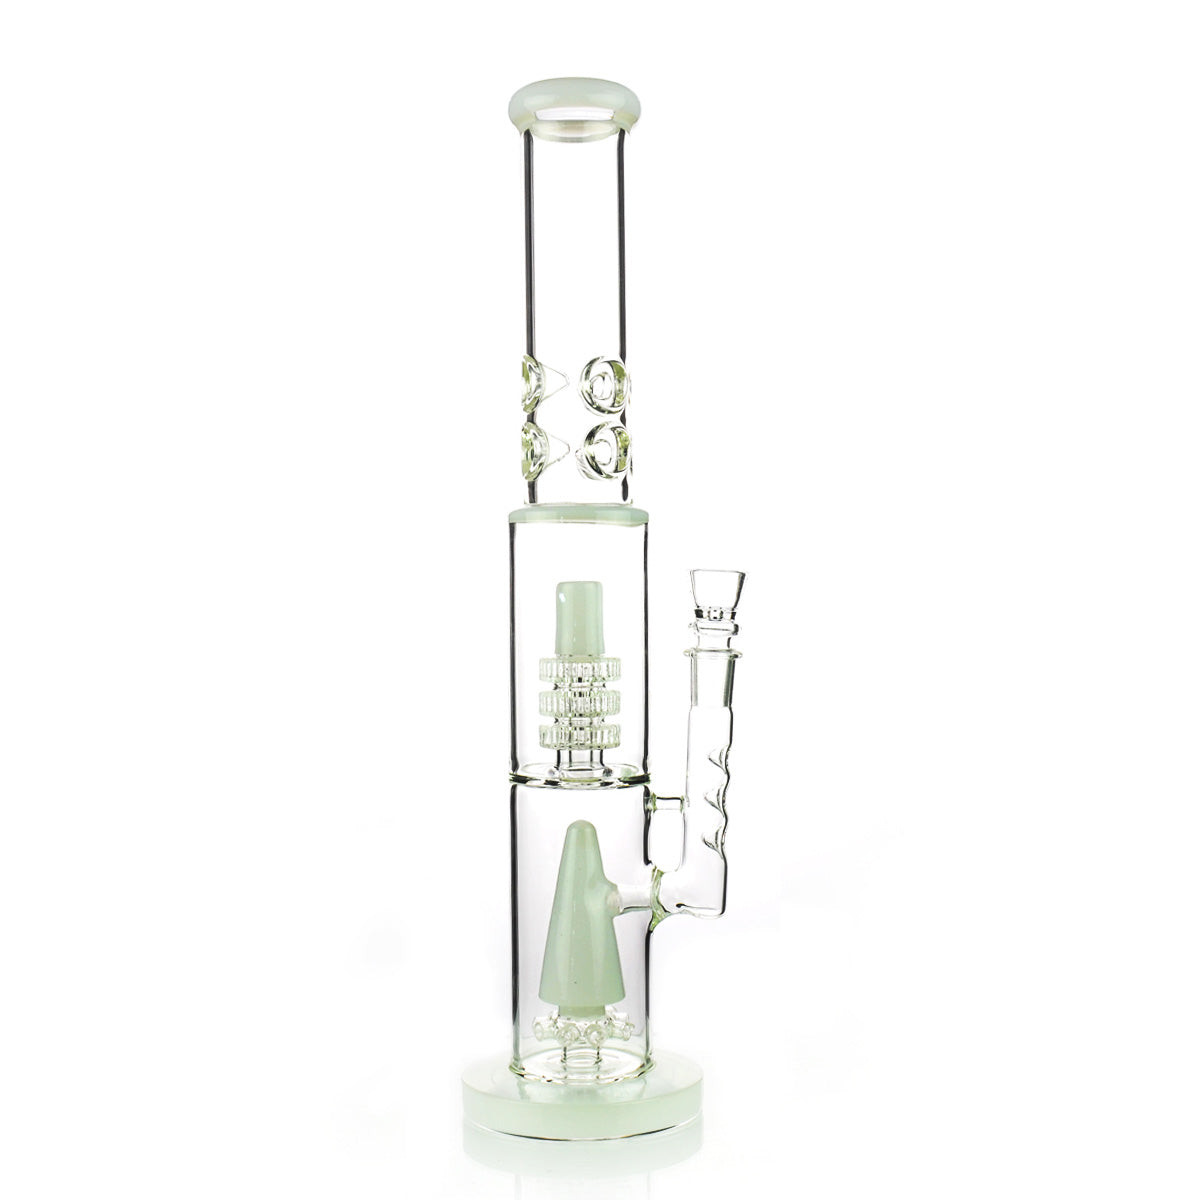 18" M9 Pyramid Shower with 3 Mertix Ring Perc and Ice Catcher, 18mm Male Bowl Included - LA Wholesale Kings